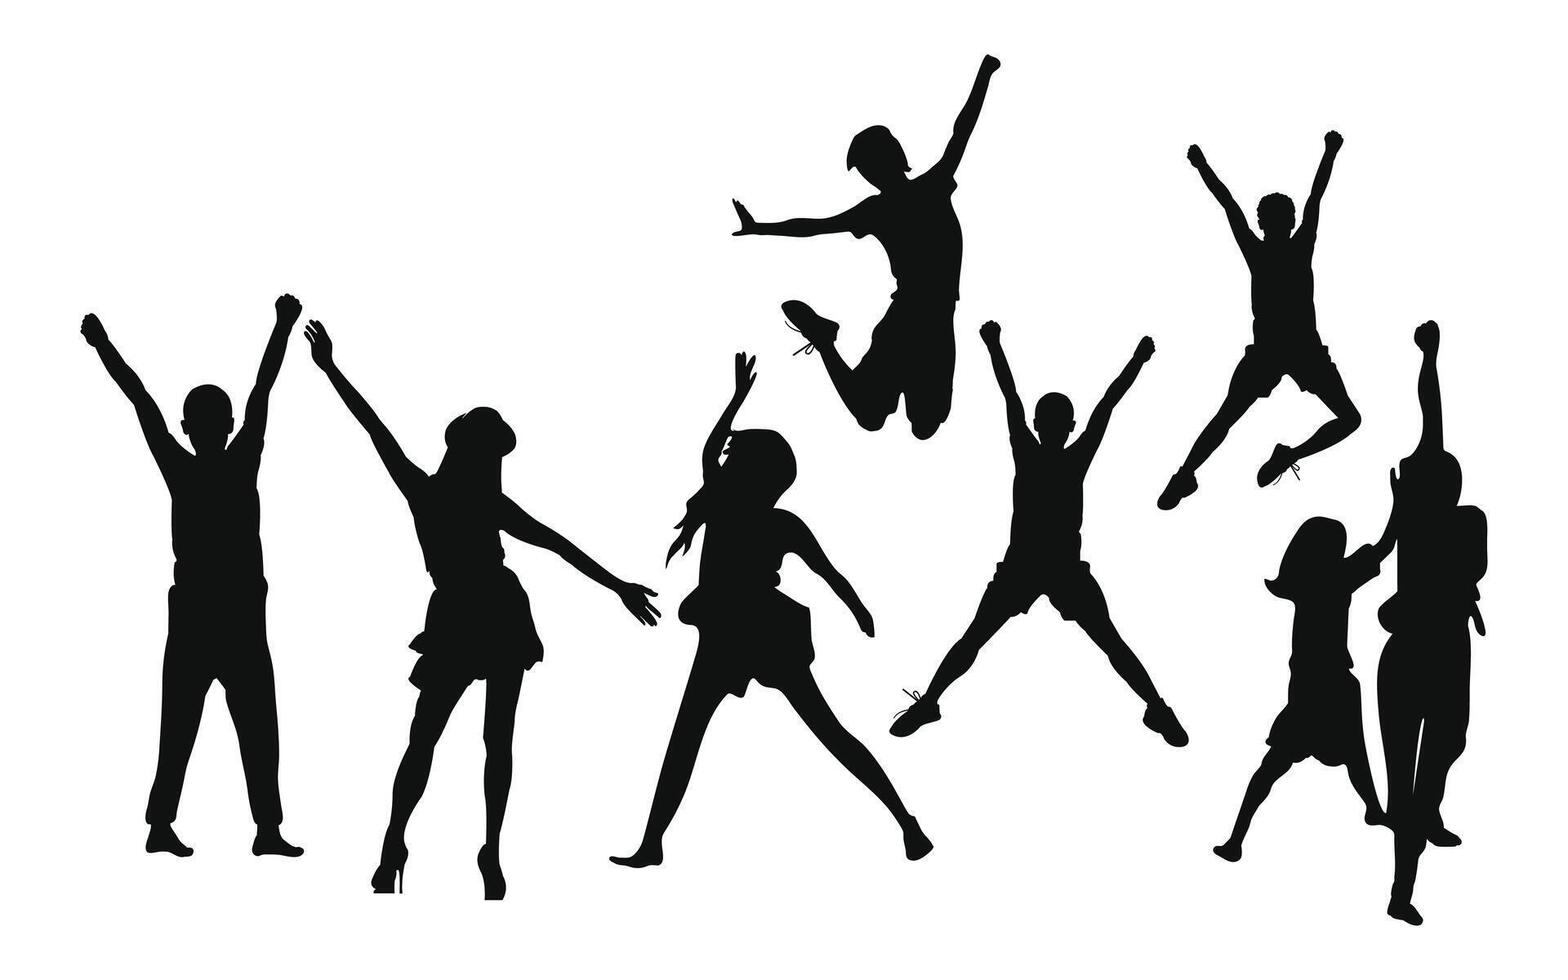 Silhouette collection of happy people jumping in various poses. vector